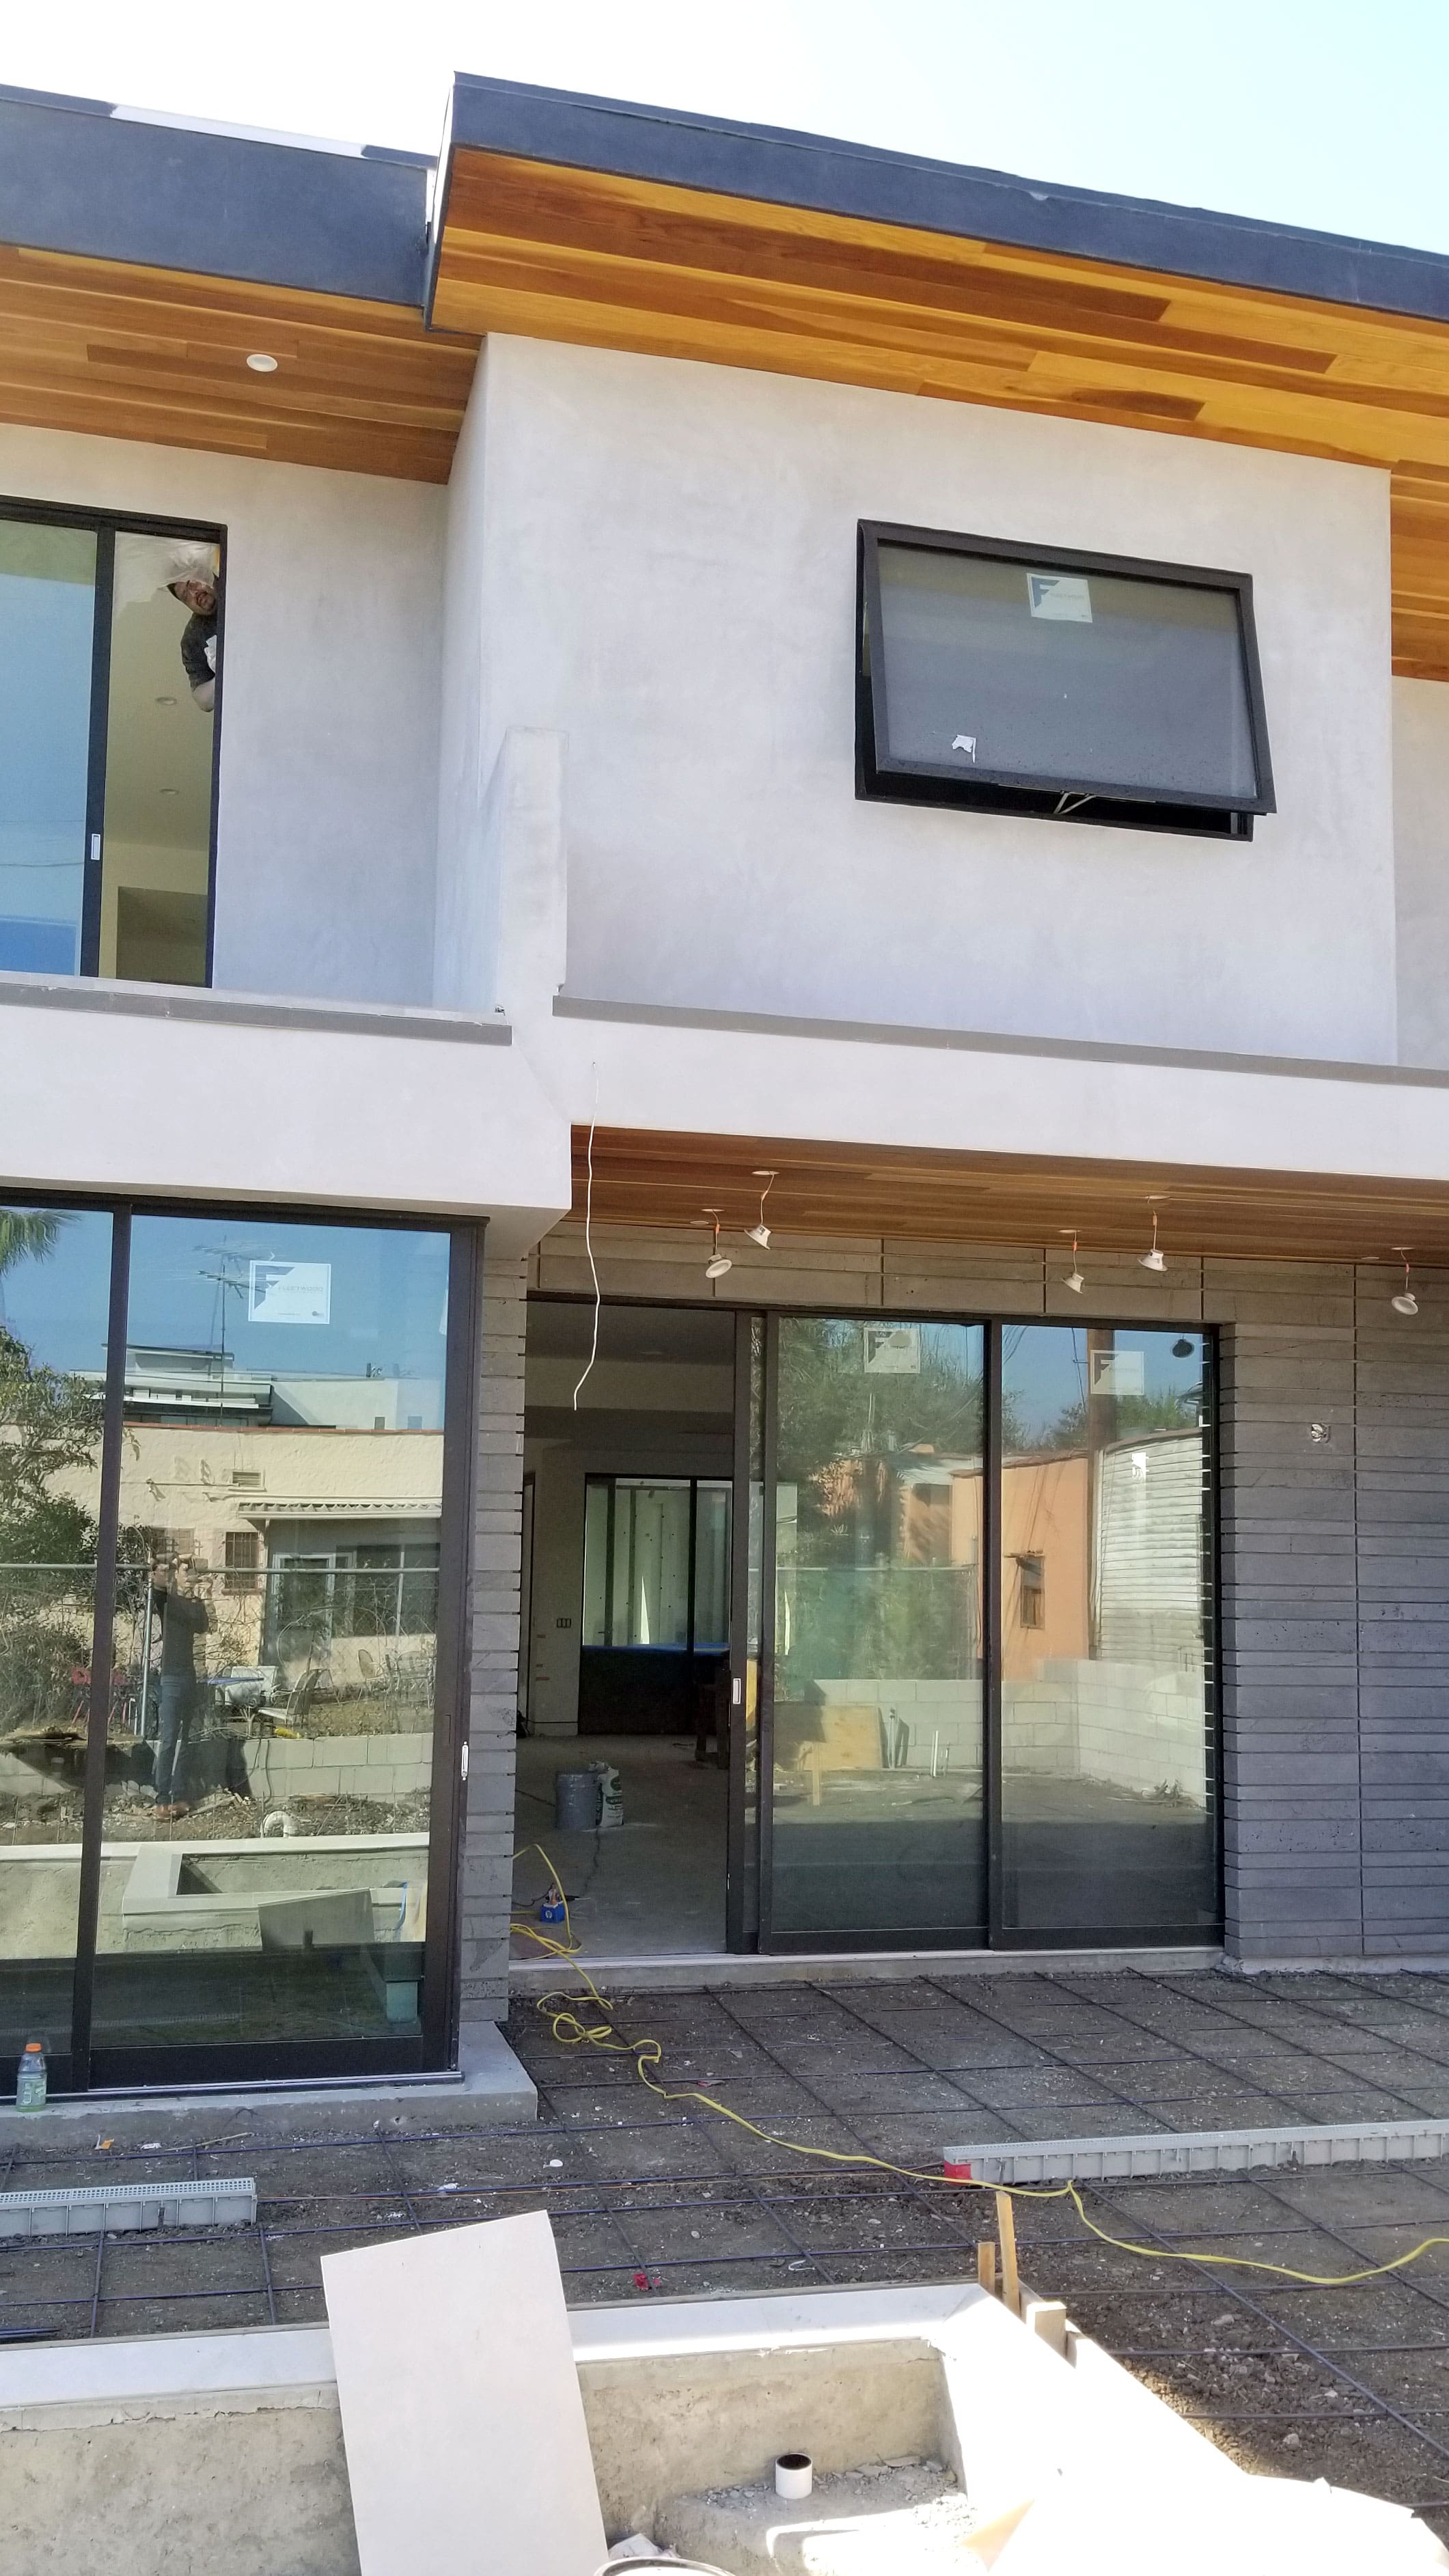 Norstone Platinum Planc Large Format Tile used on the exterior of a modern home around large sliding glass doors in Hollywood, CA